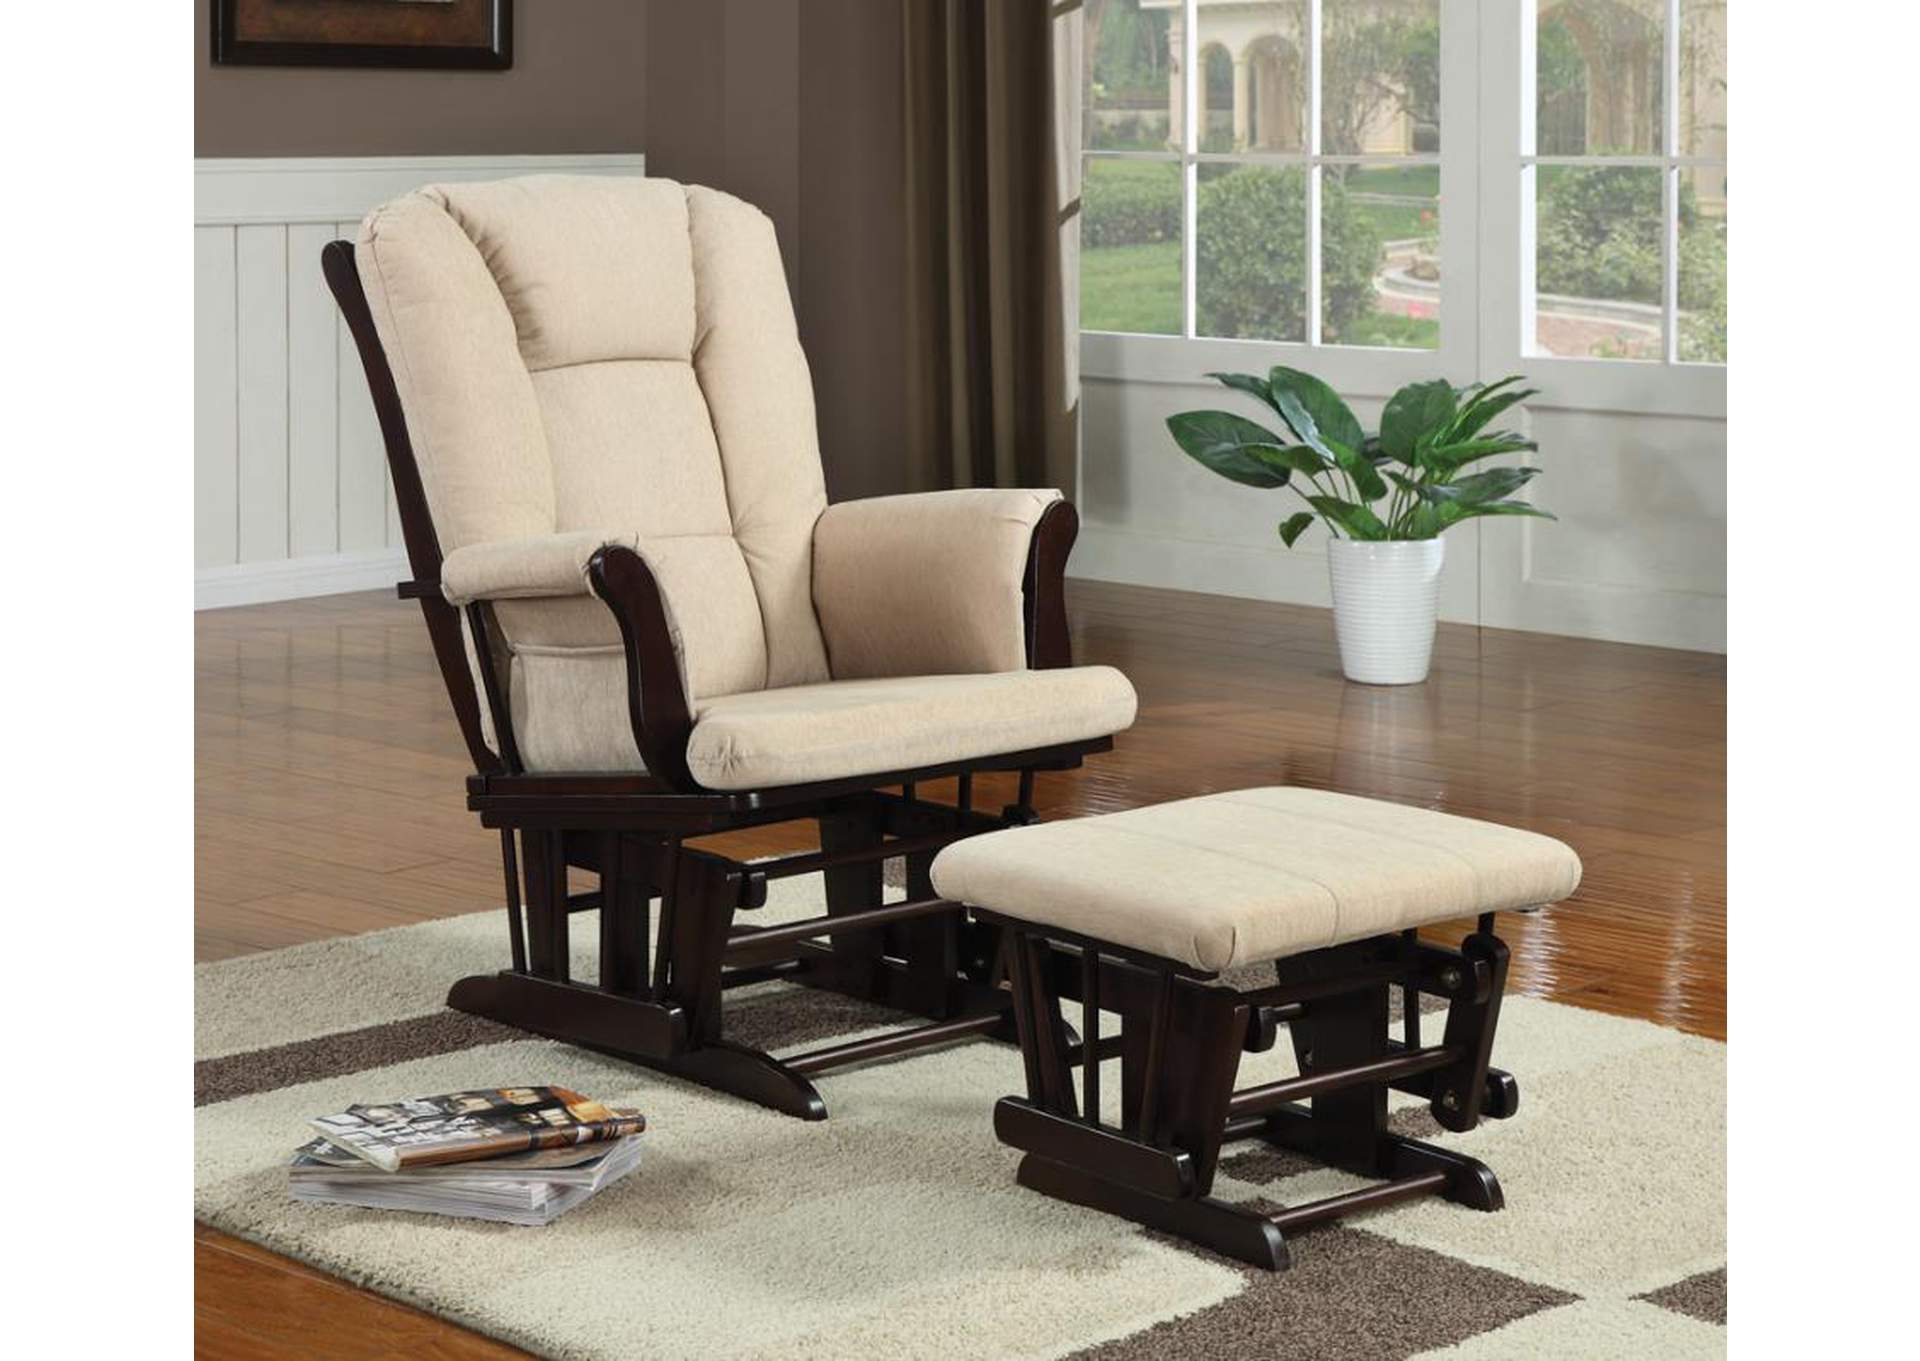 Upholstered Glider With Ottoman Beige And Espresso,Coaster Furniture